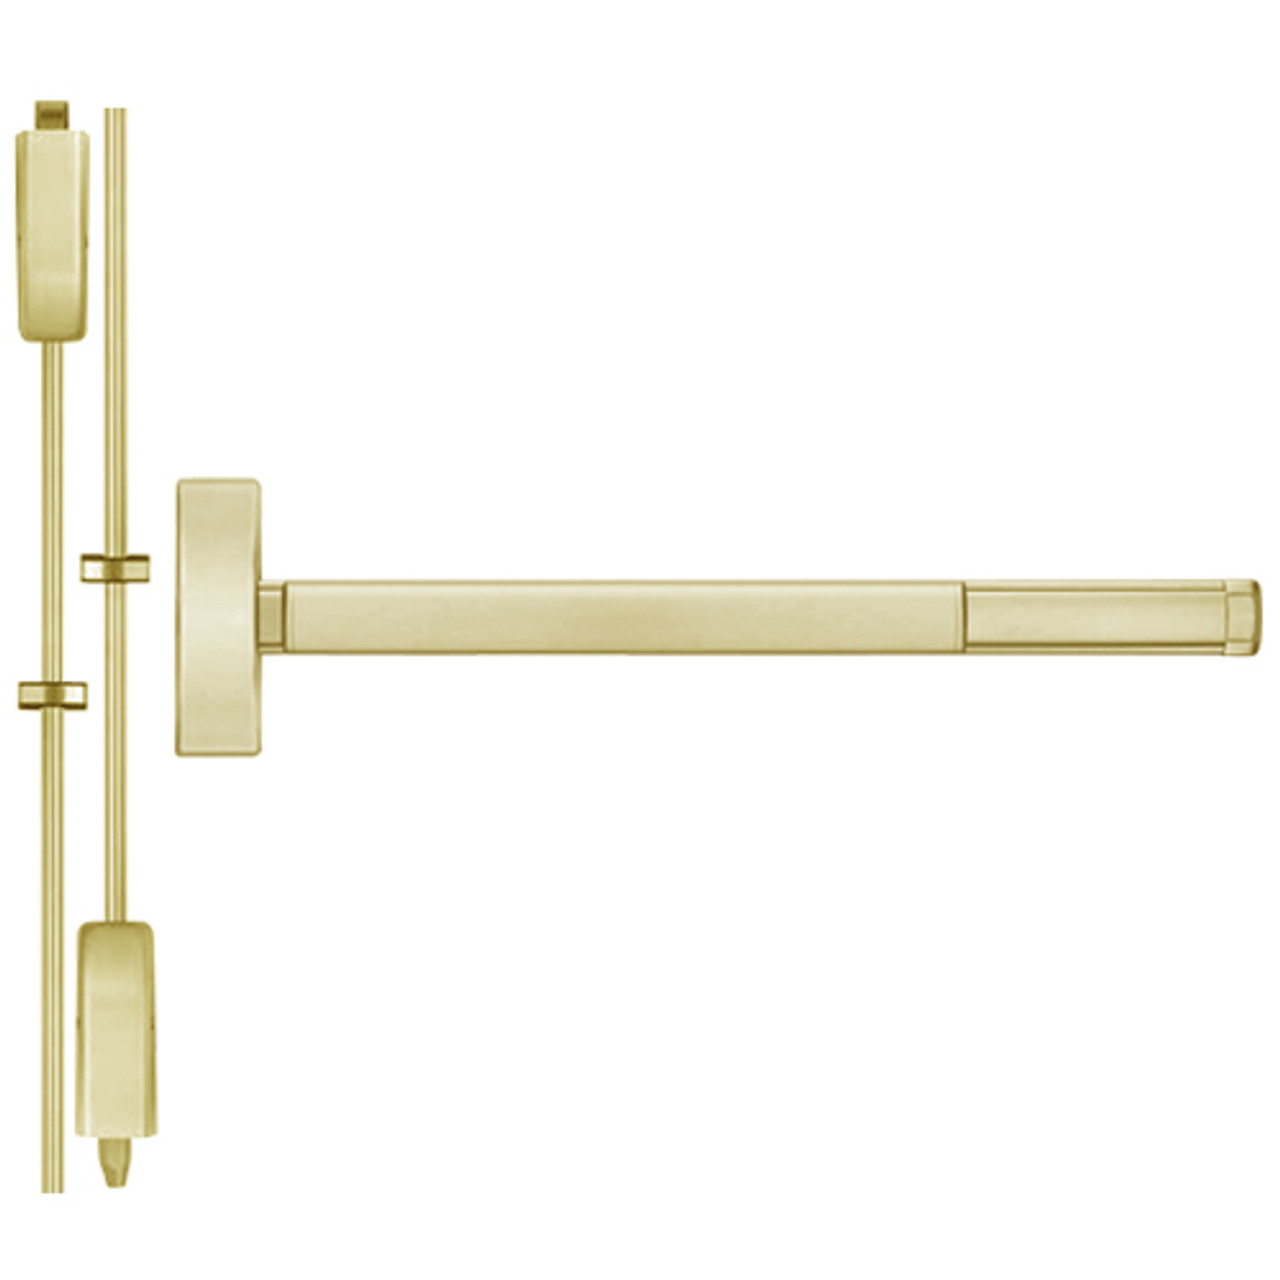 DEFL2208LBR-606-36 PHI 2200 Series Fire Rated Apex Surface Vertical Rod Device with Delayed Egress Prepped for Key Controls Lever/Knob in Satin Brass Finish